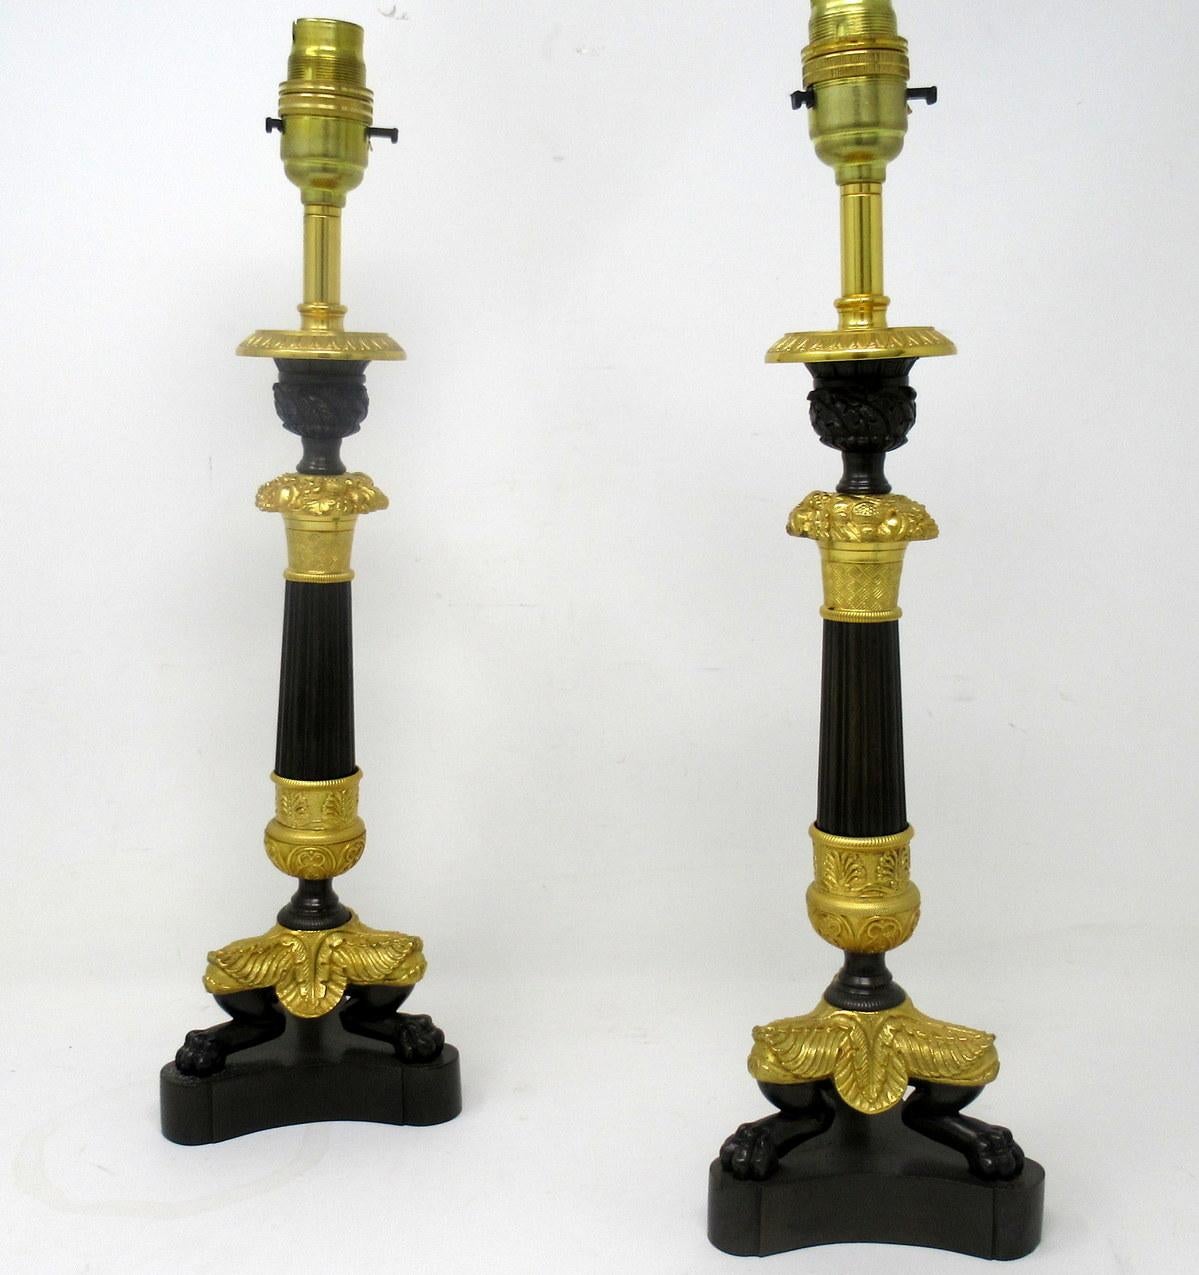 An exceptionally fine pair French Ormolu and bronze early Victorian single light candlesticks of small proportions, now converted to a stunning pair of electric table lamps, offered in exceptional condition, each with unusual reeded central bronze